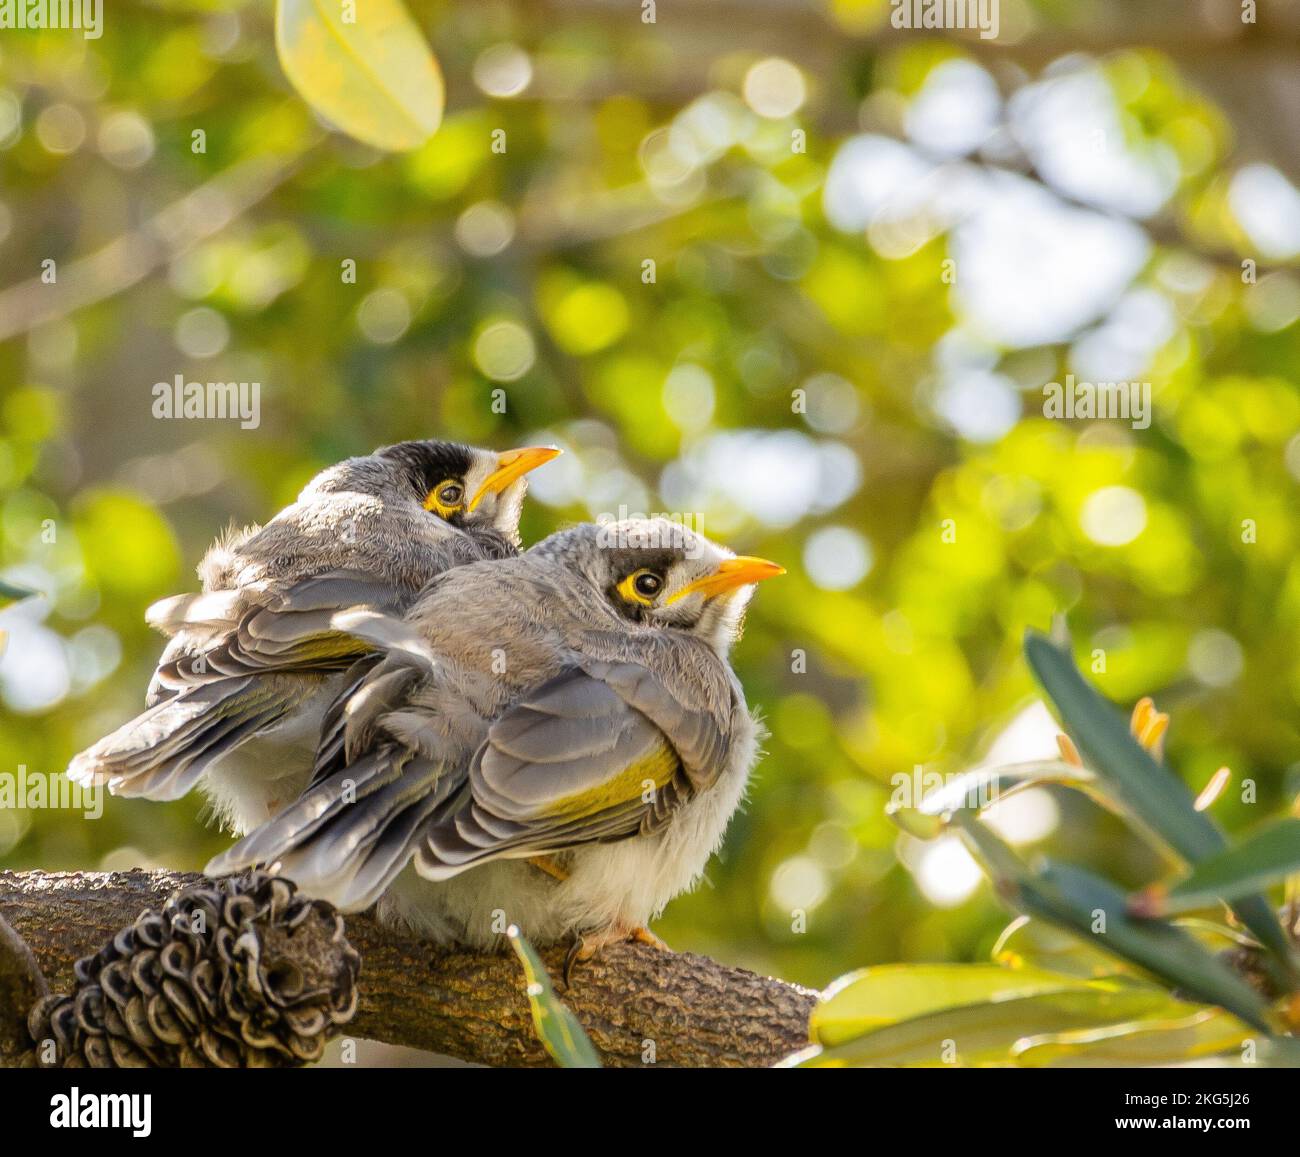 An in love couple of birds Stock Photo